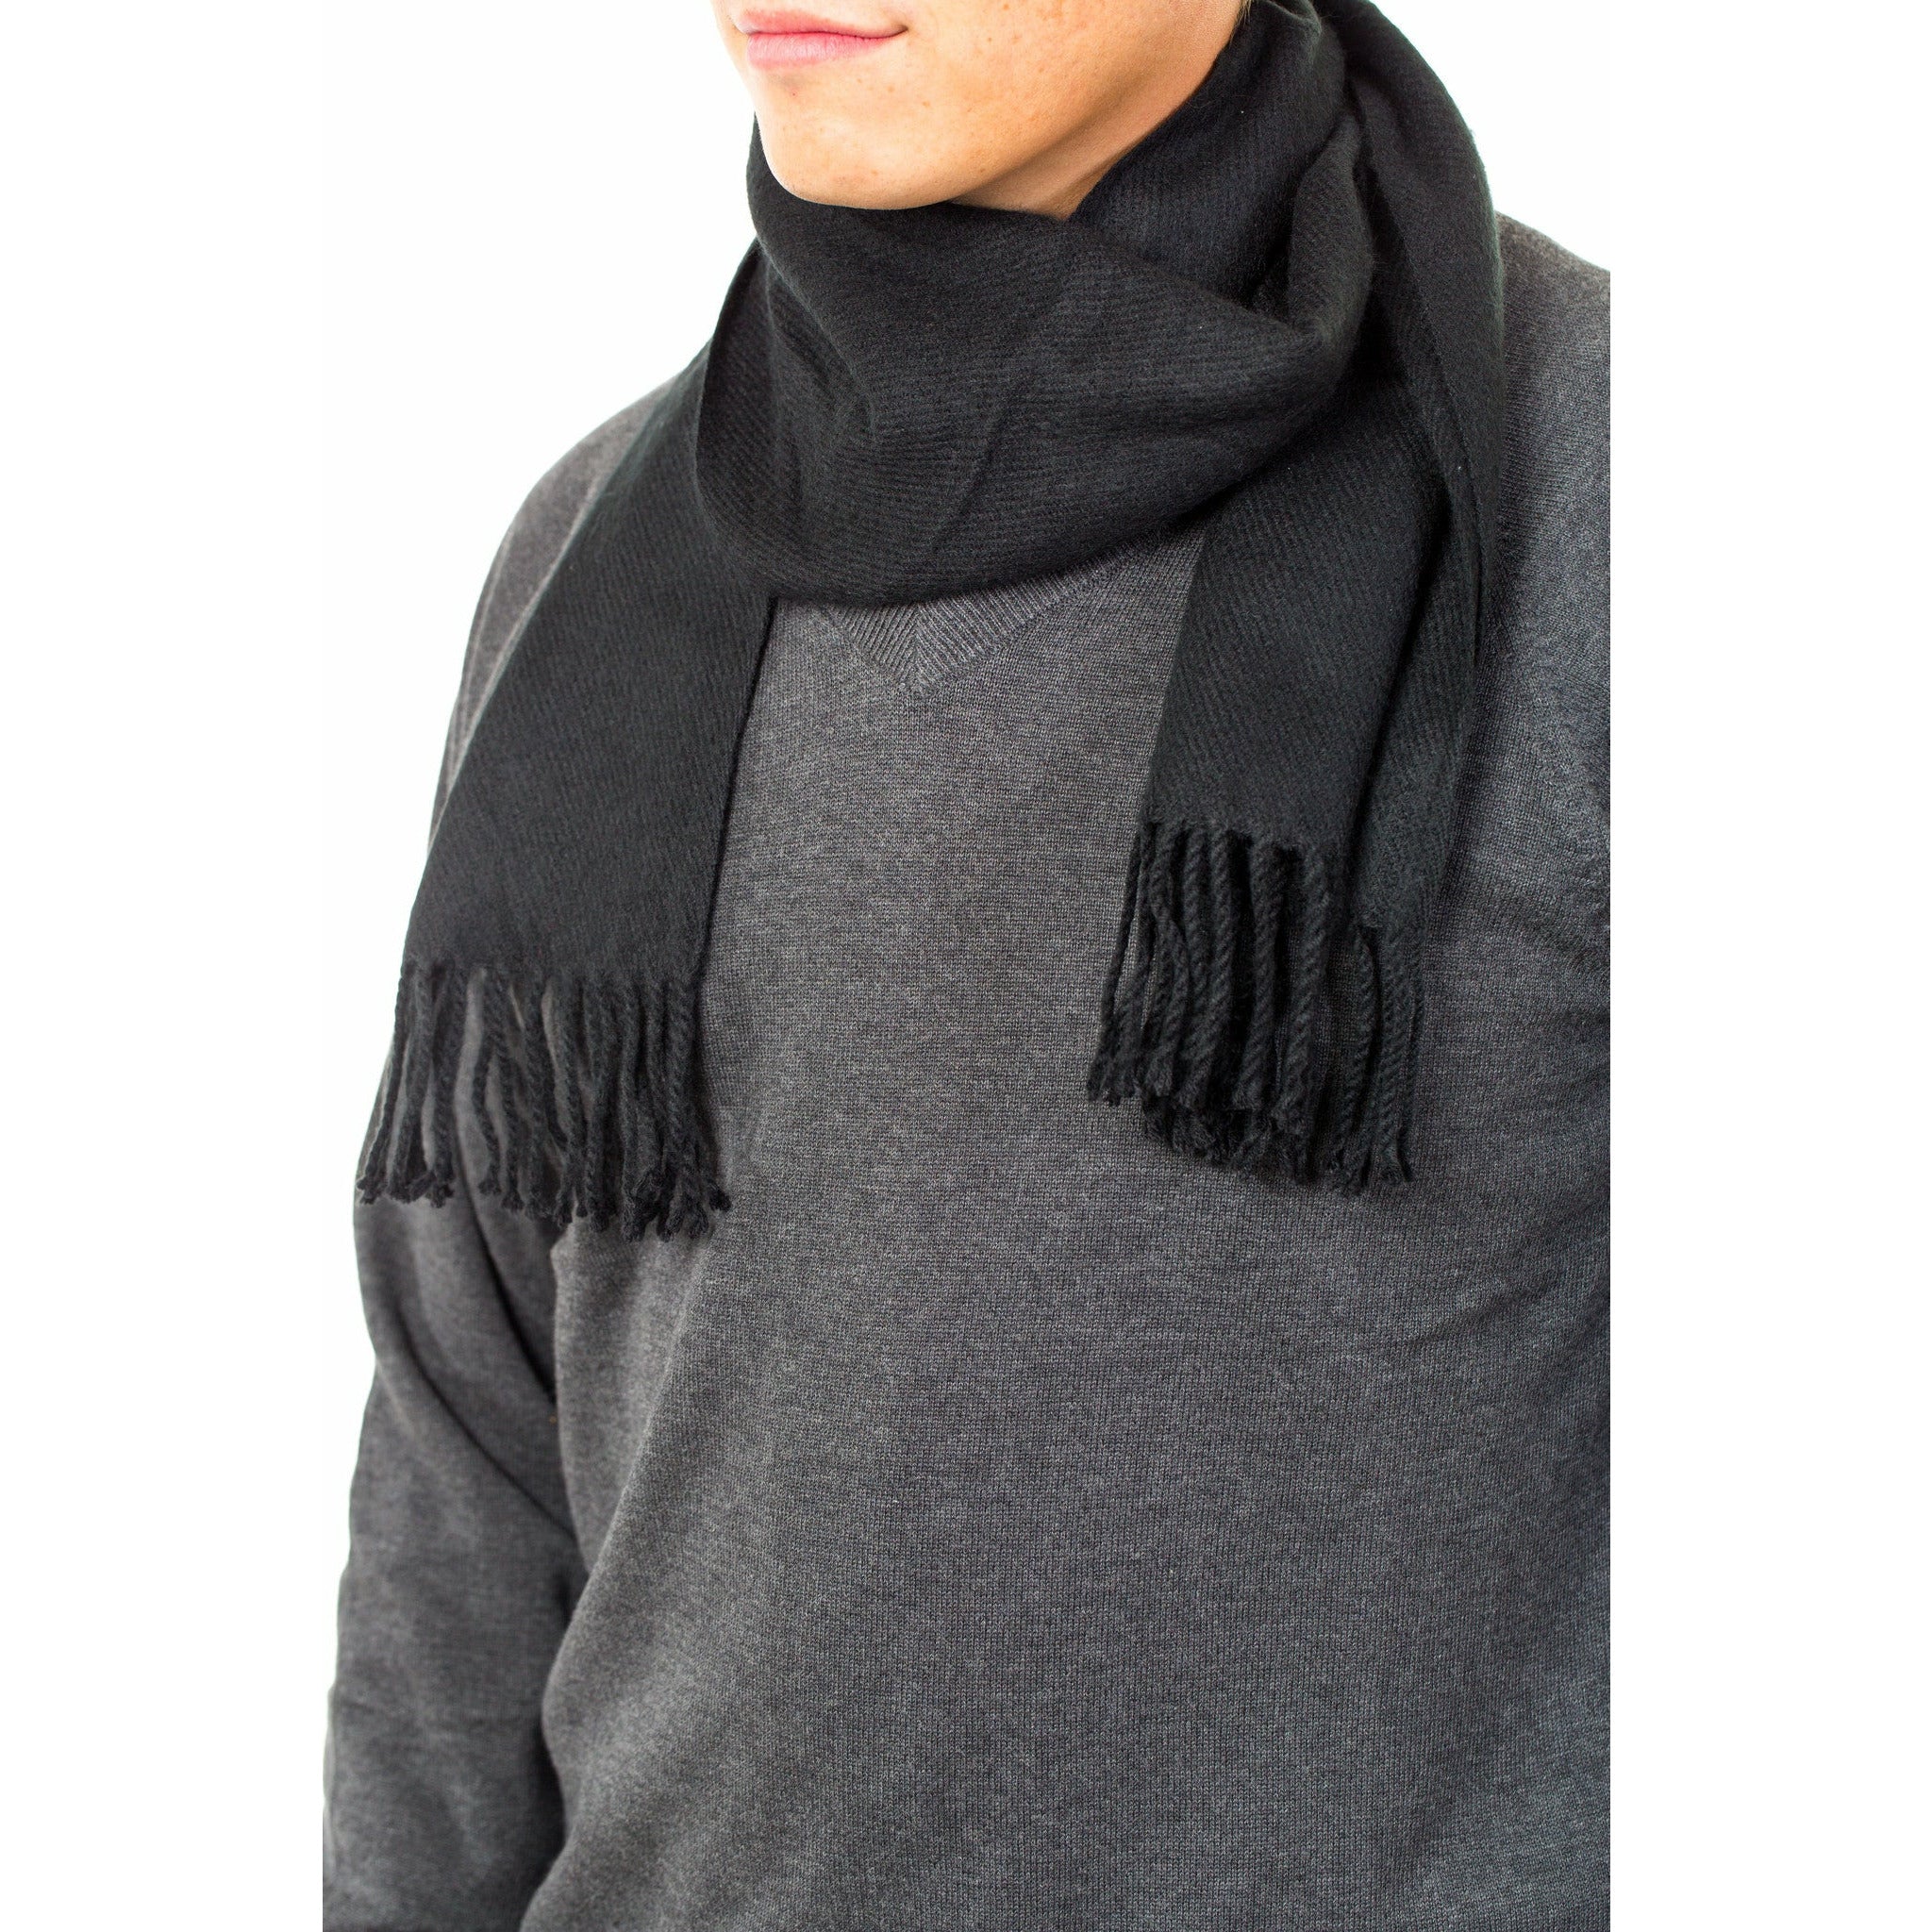 Black Acrylic Winter Scarf - The Kater Shop - 1